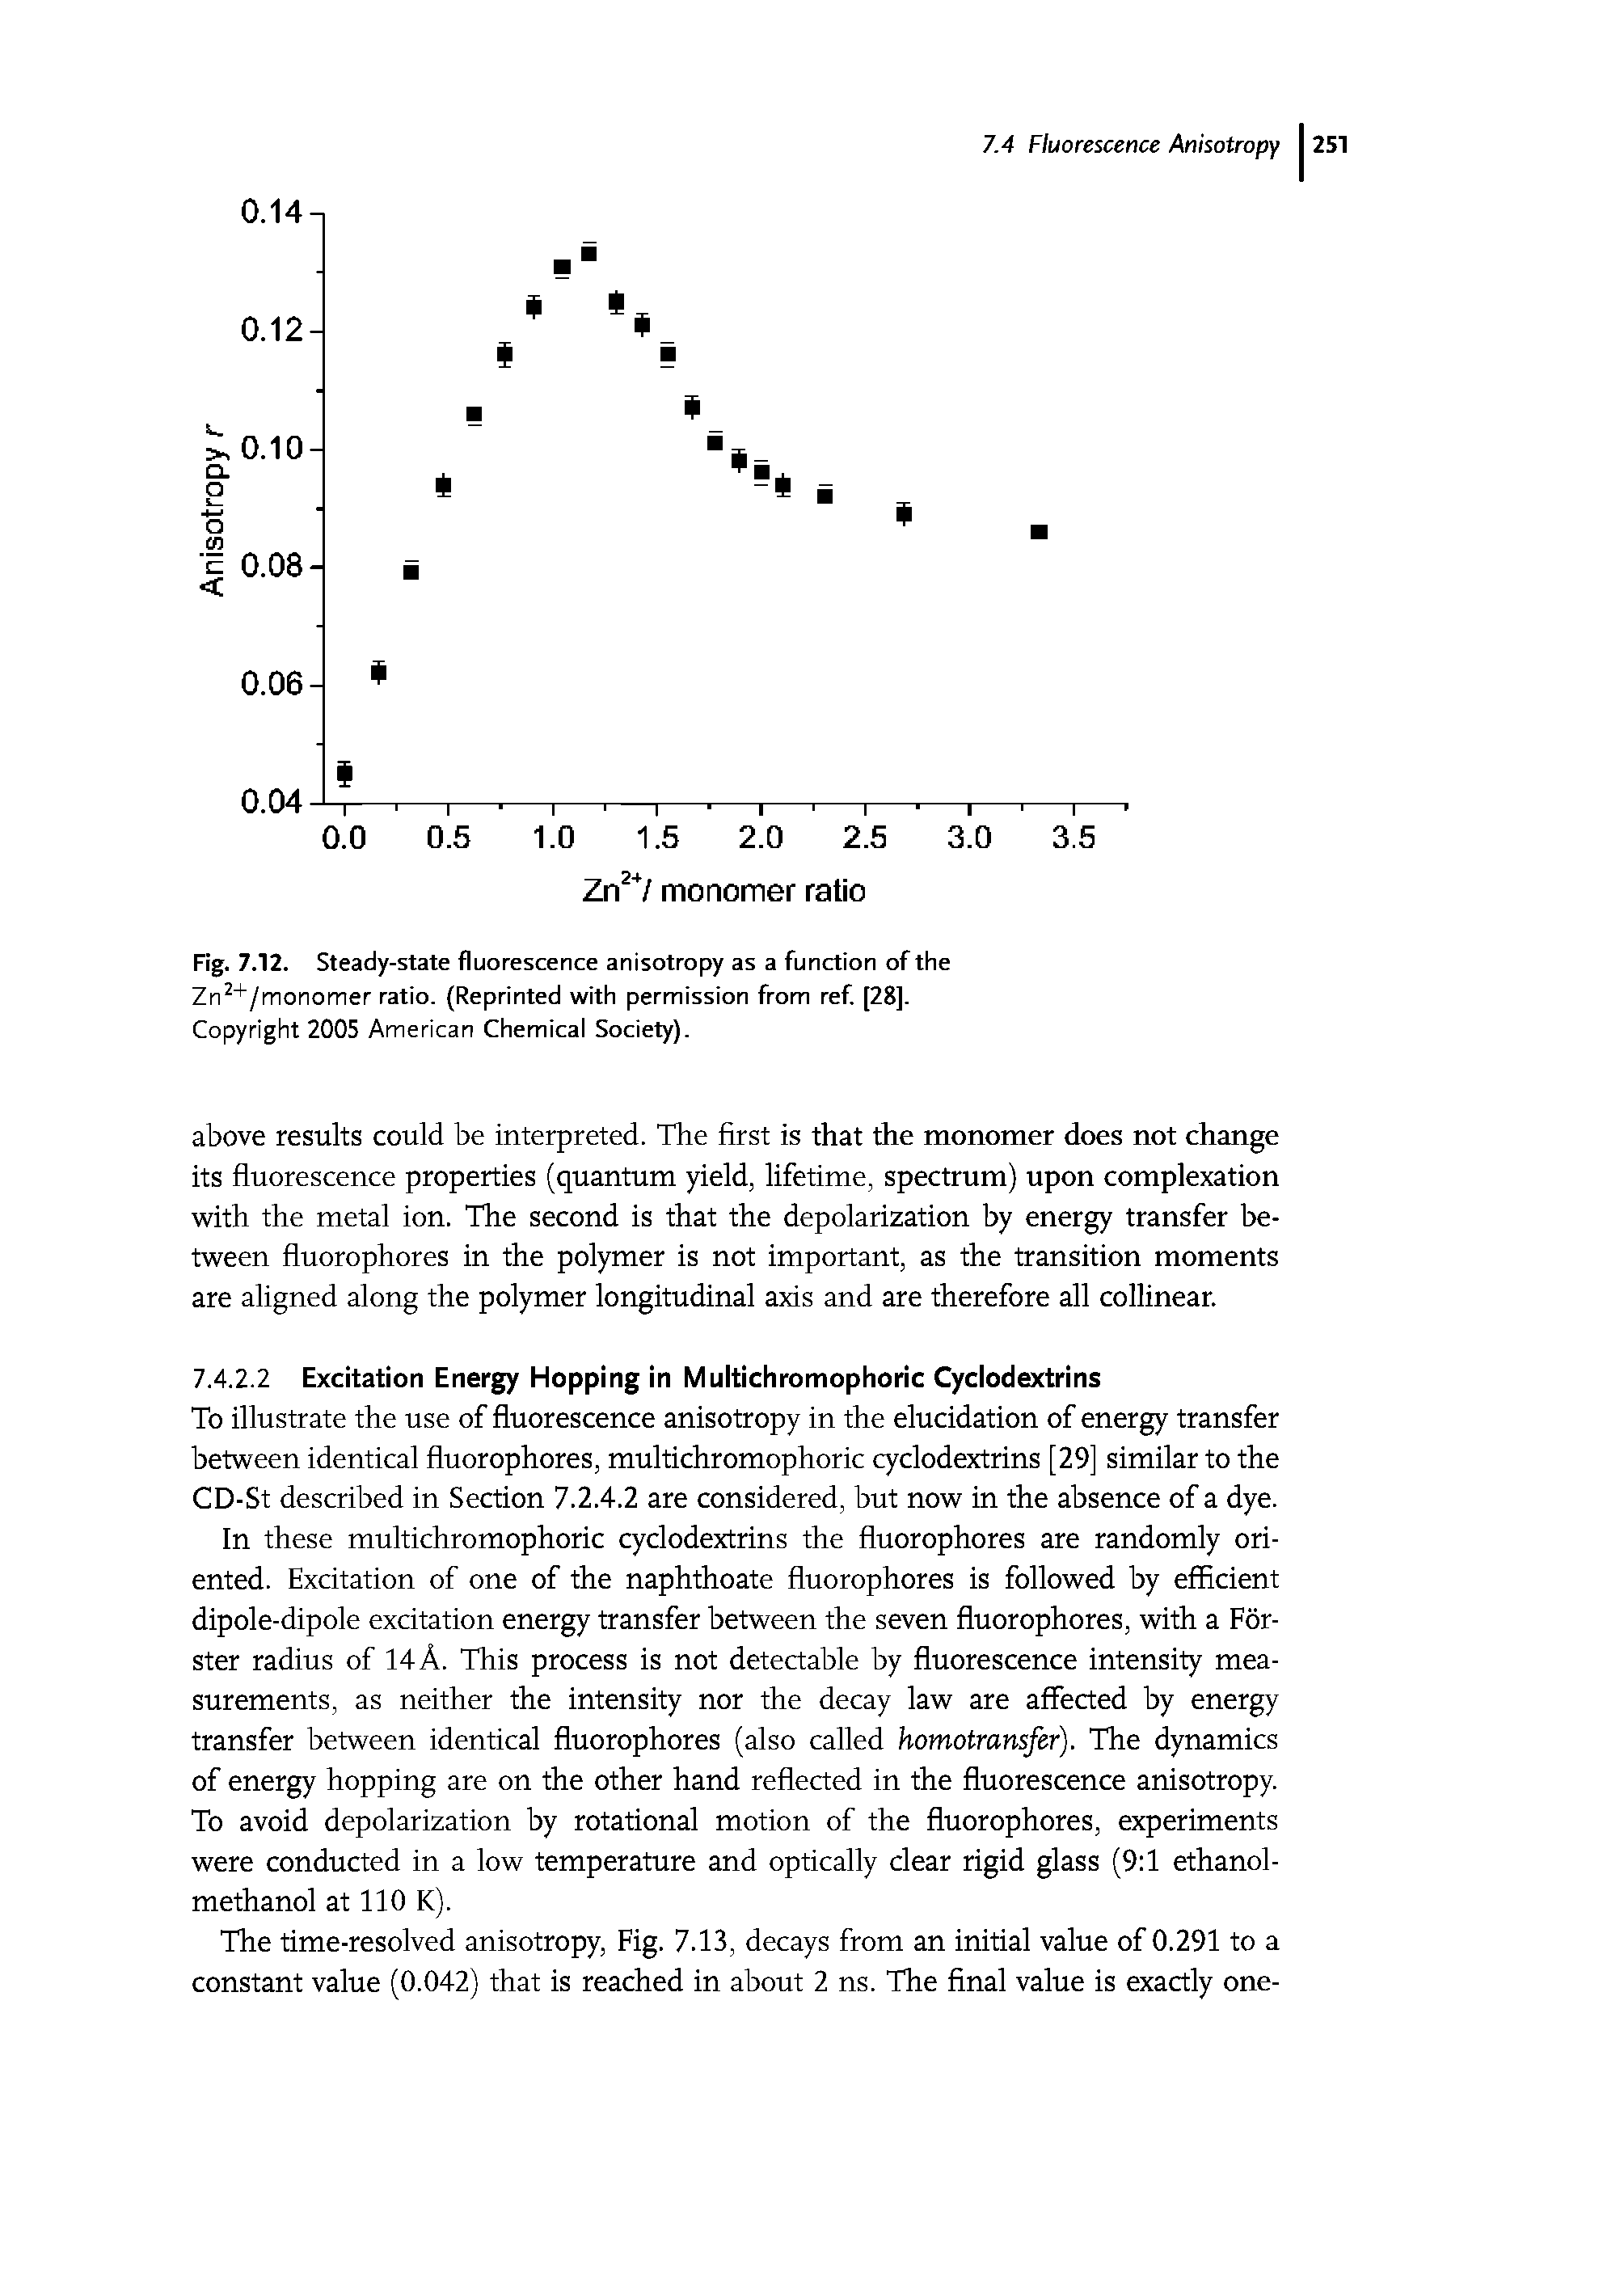 Fig. 7.12. Steady-state fluorescence anisotropy as a function of the Zn +/monomer ratio. (Reprinted with permission from ref. [28]. Copyright 2005 American Chemical Society).